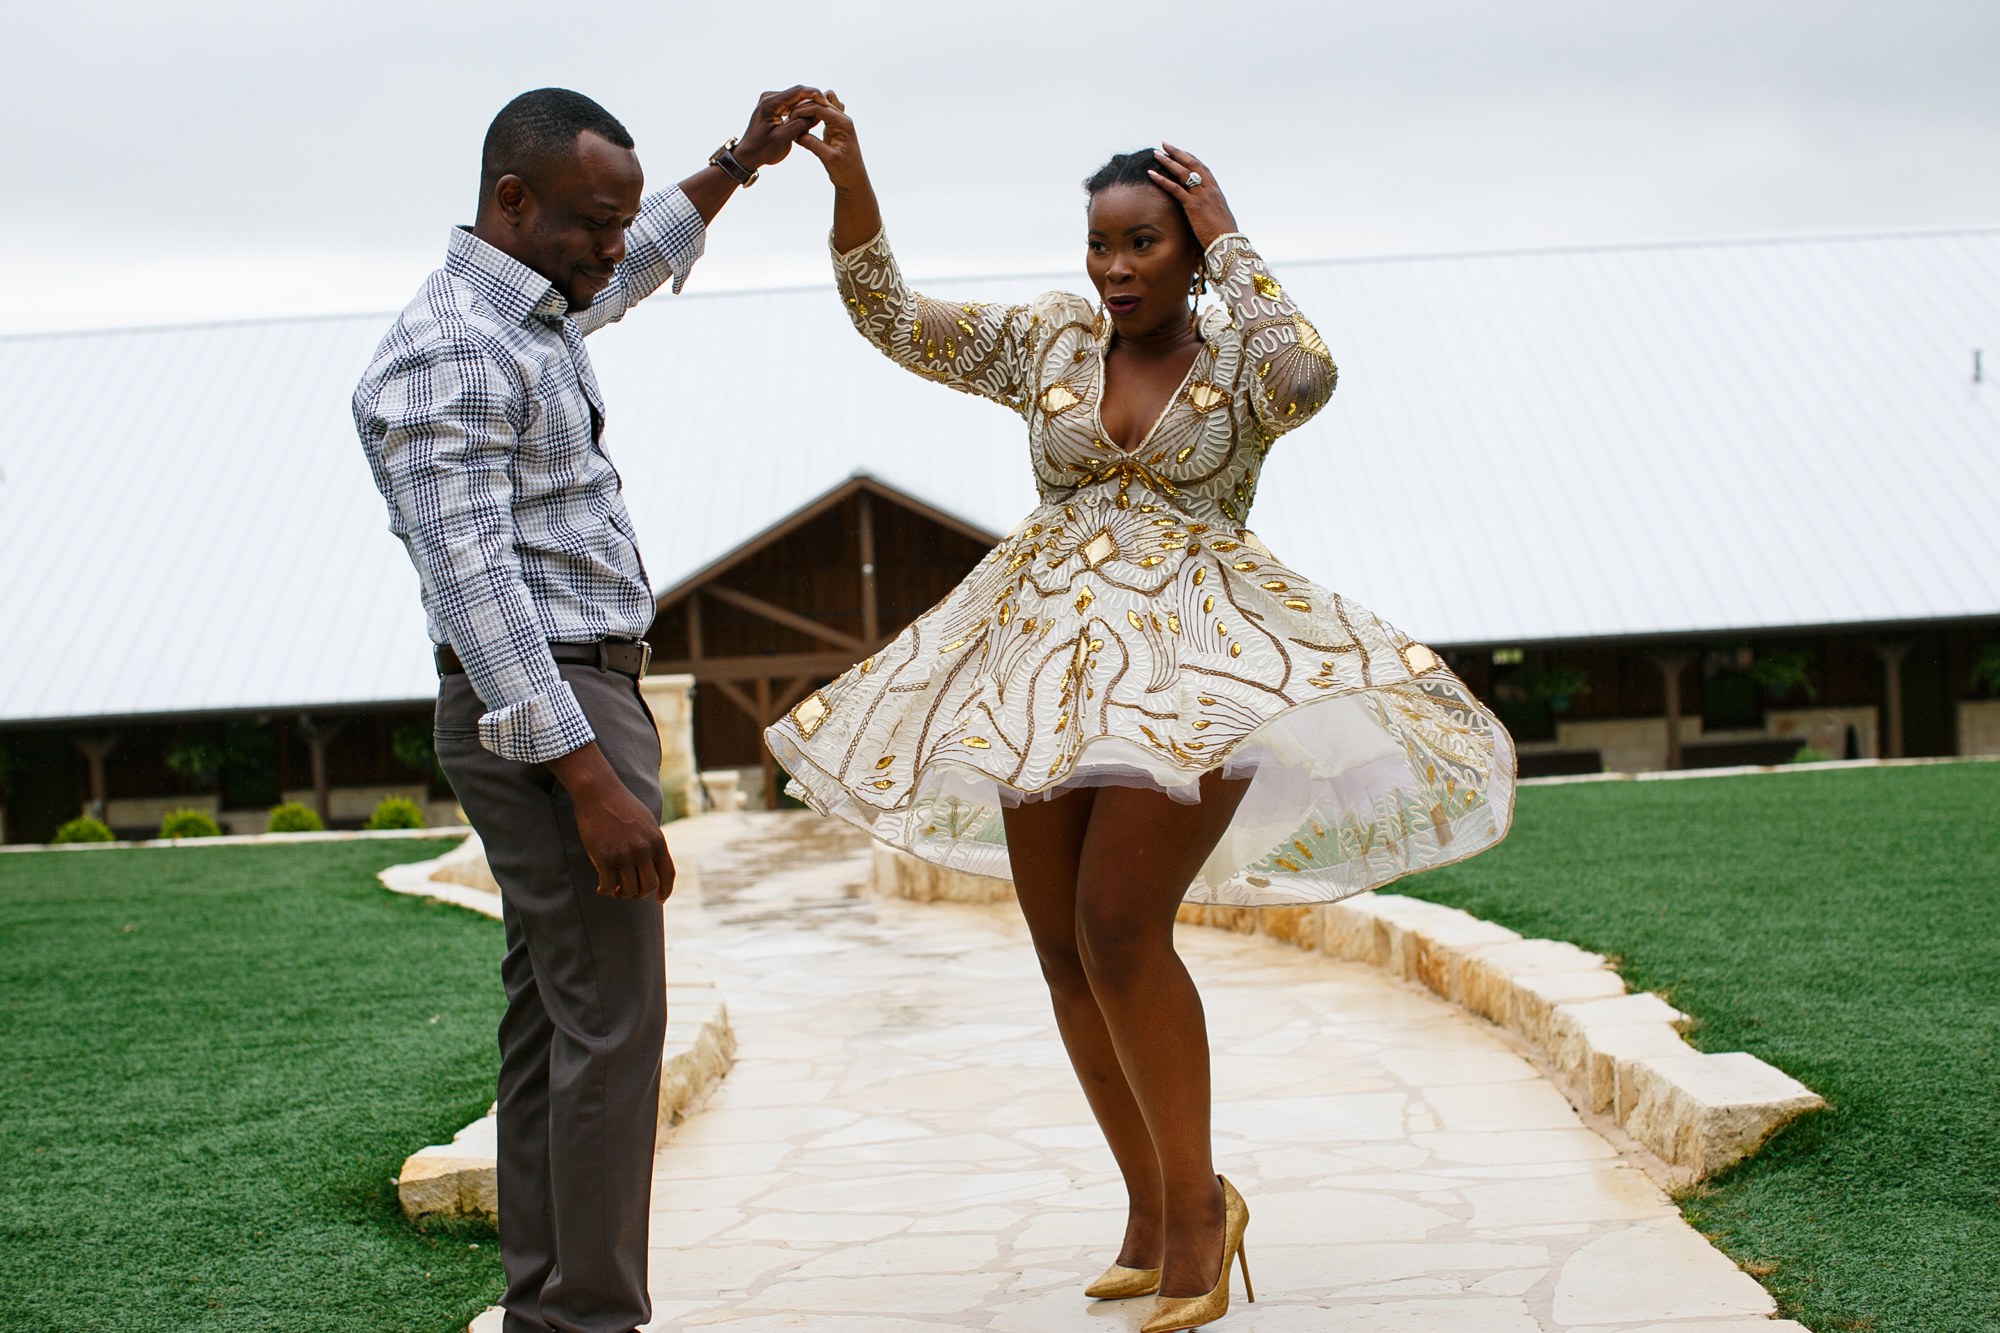 PHOTO: These engagement photos of Jessica Chinyelu Ezeanya and her fiance Hilary Anibowei, of Dallas, Texas, have gone viral on social media.